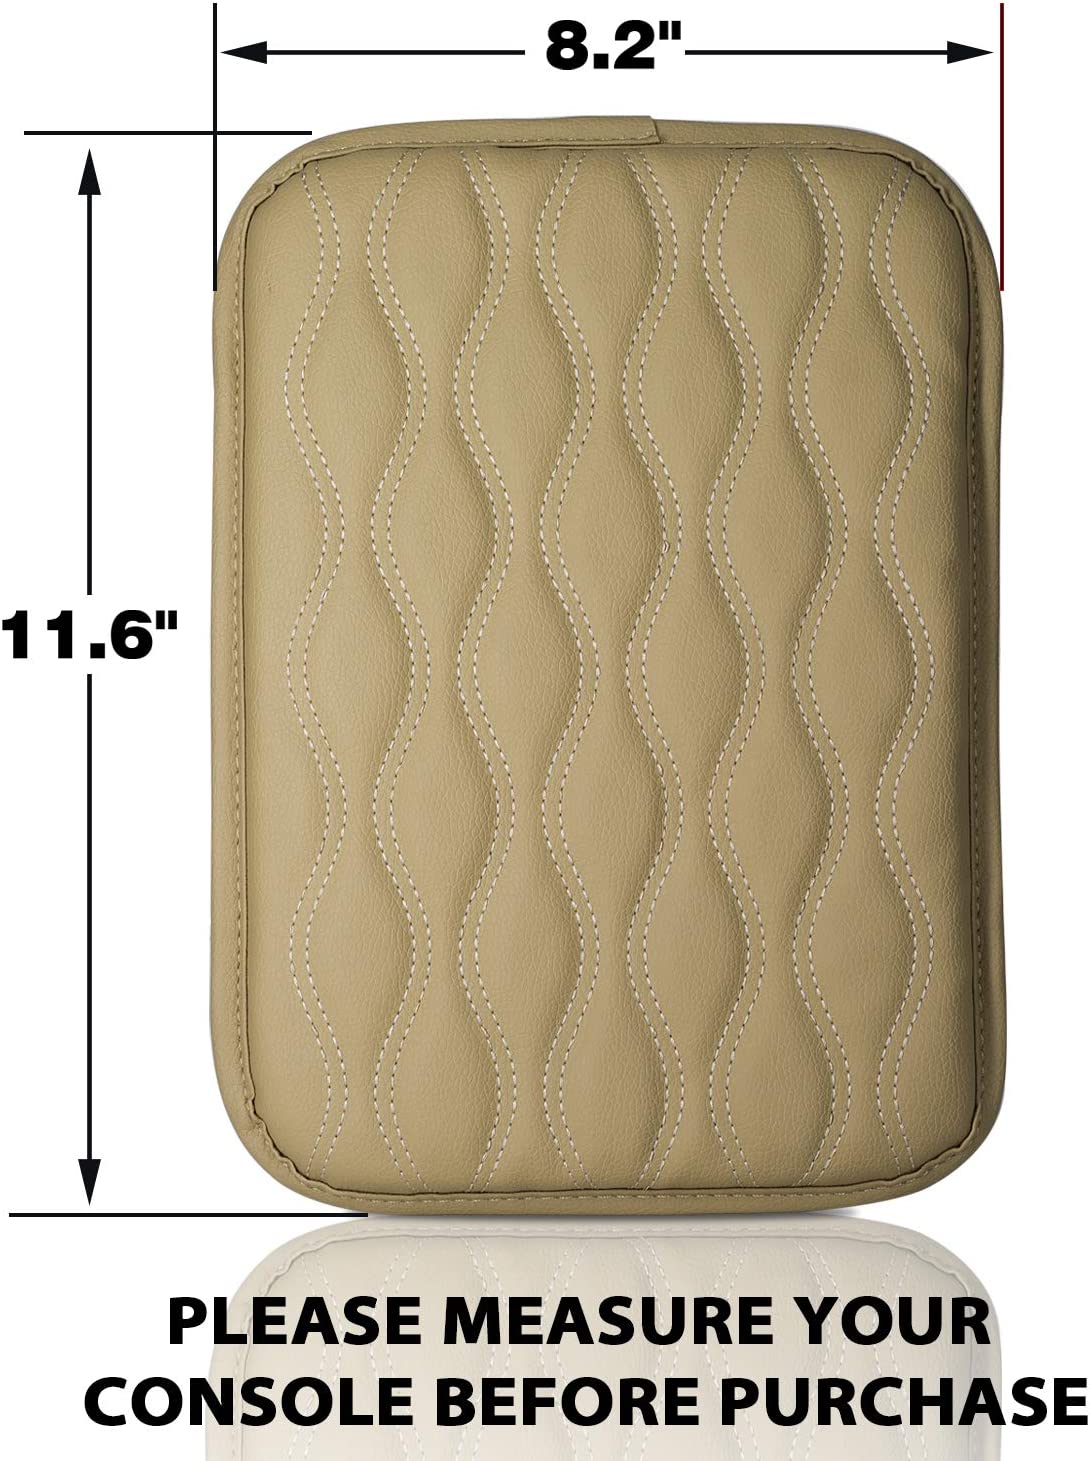 Universal Center Console Cover for Most Vehicle, SUV, Truck, Car, Waterproof Armrest Cover Center Console Pad, Car Armrest Seat Box Cover Protector (Beige)